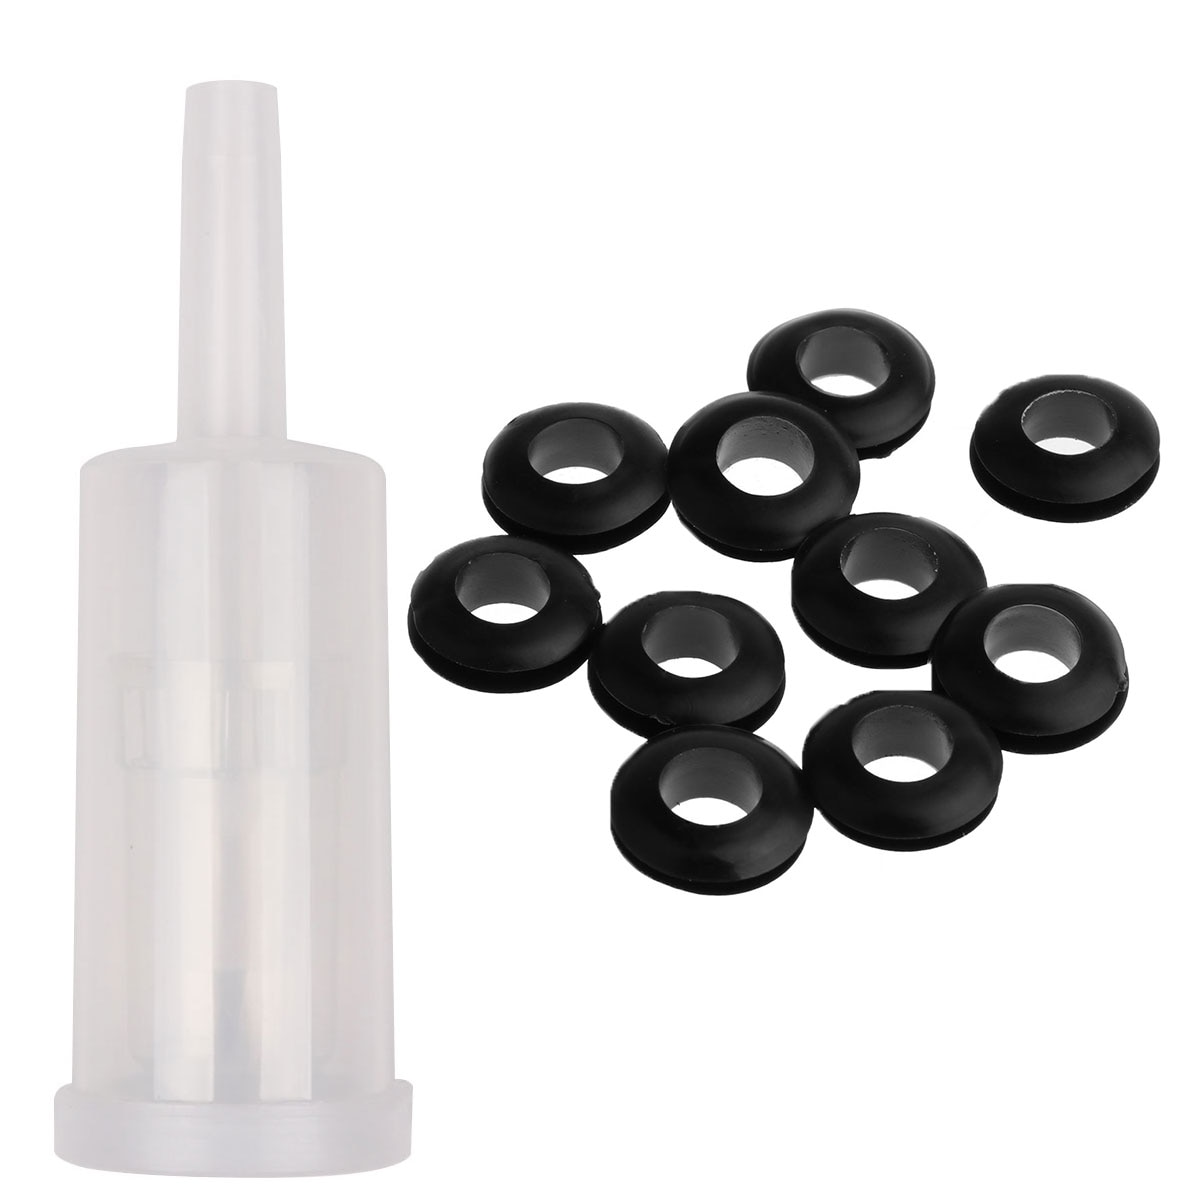 Home Brewing Fermentation Tools Kit 10 Silicone Seal Grommets with 6 ...